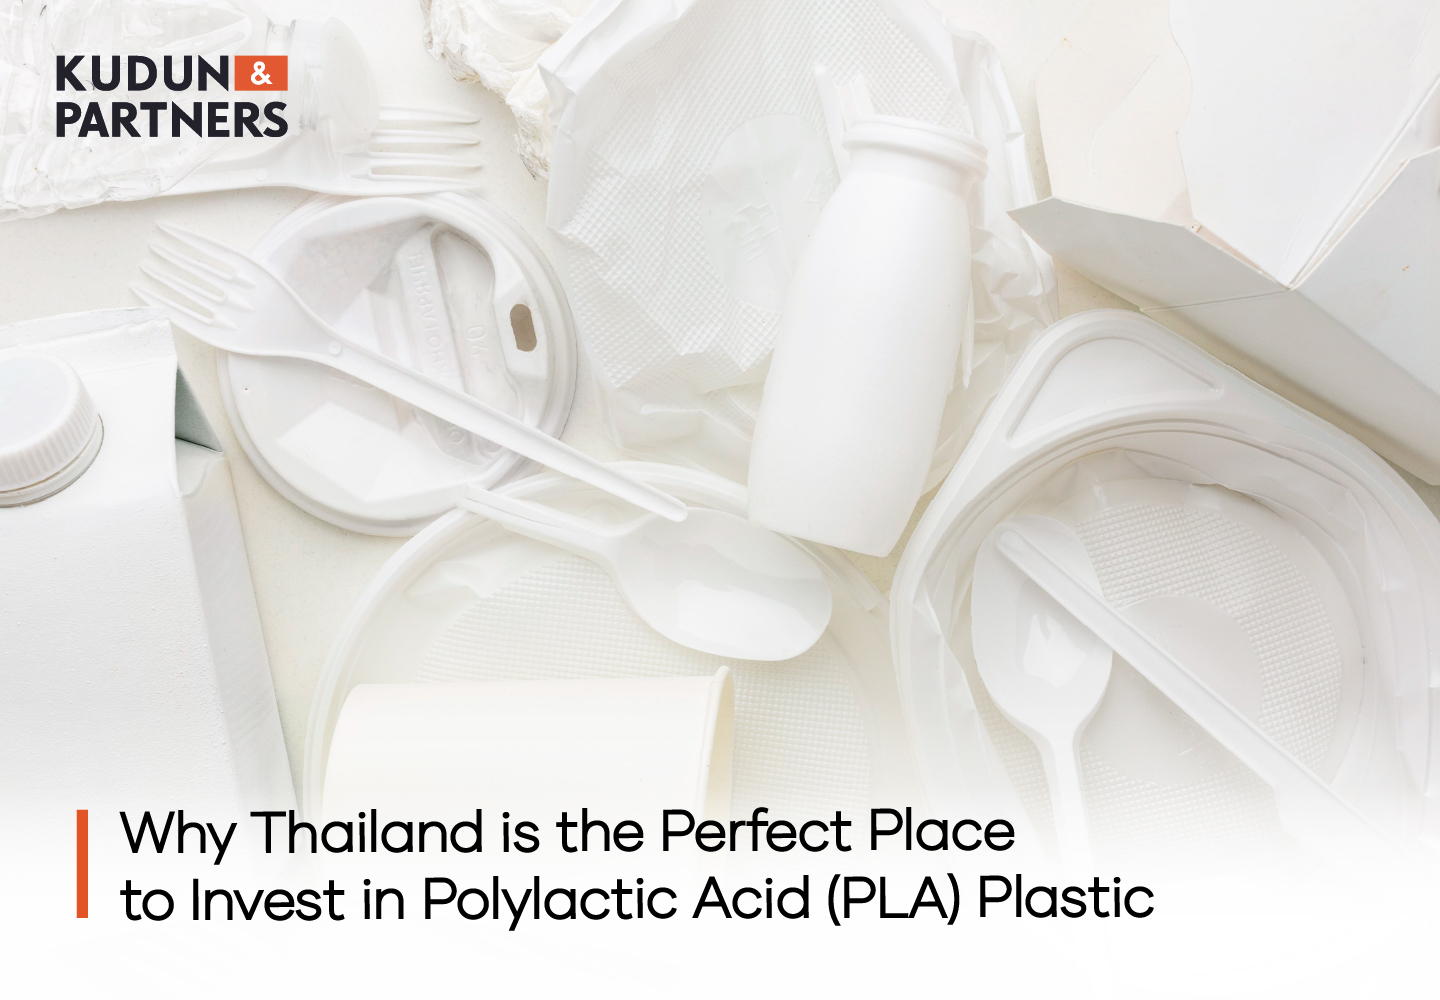 Why Thailand is the Perfect Place to Invest in Polylactic Acid (PLA) Plastic